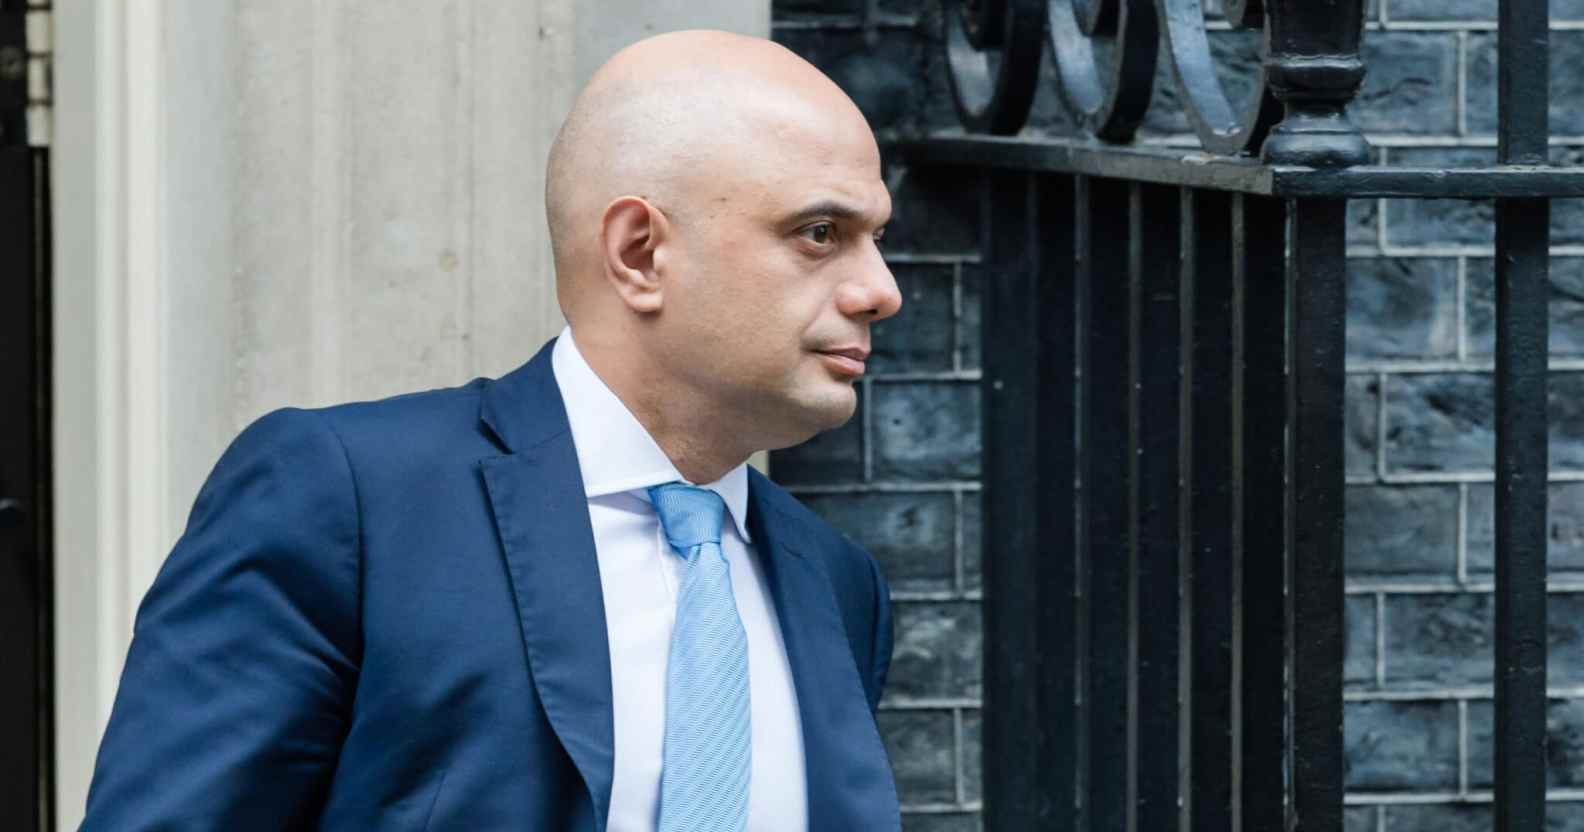 Hundreds of trans men and non-binary people have written to Sajid Javid about NHS 'failures' regarding trans healthcare.